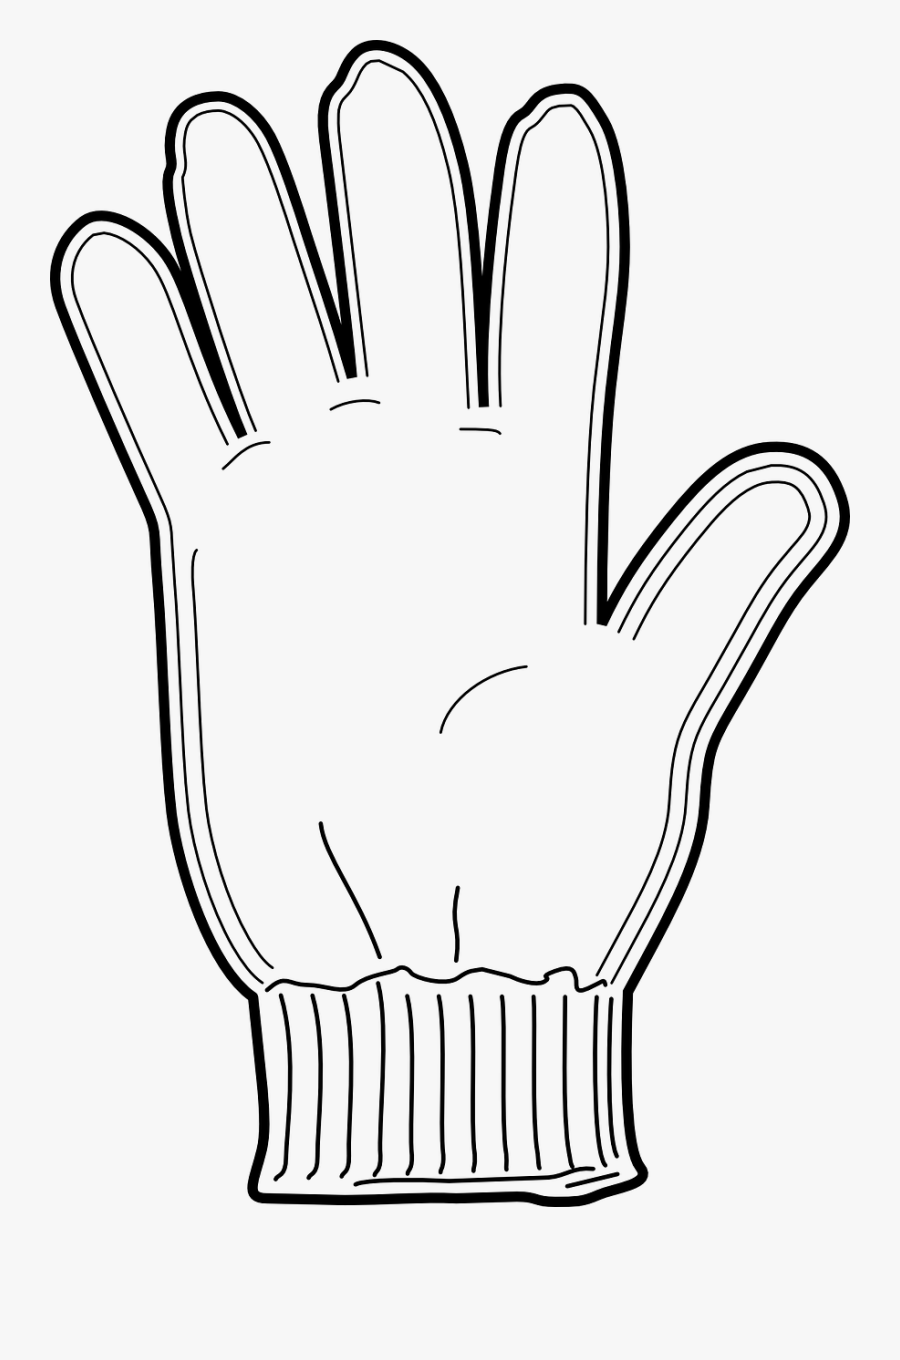 Mittens Clipart Black And White - Glove Clipart Black And White, Transparent Clipart